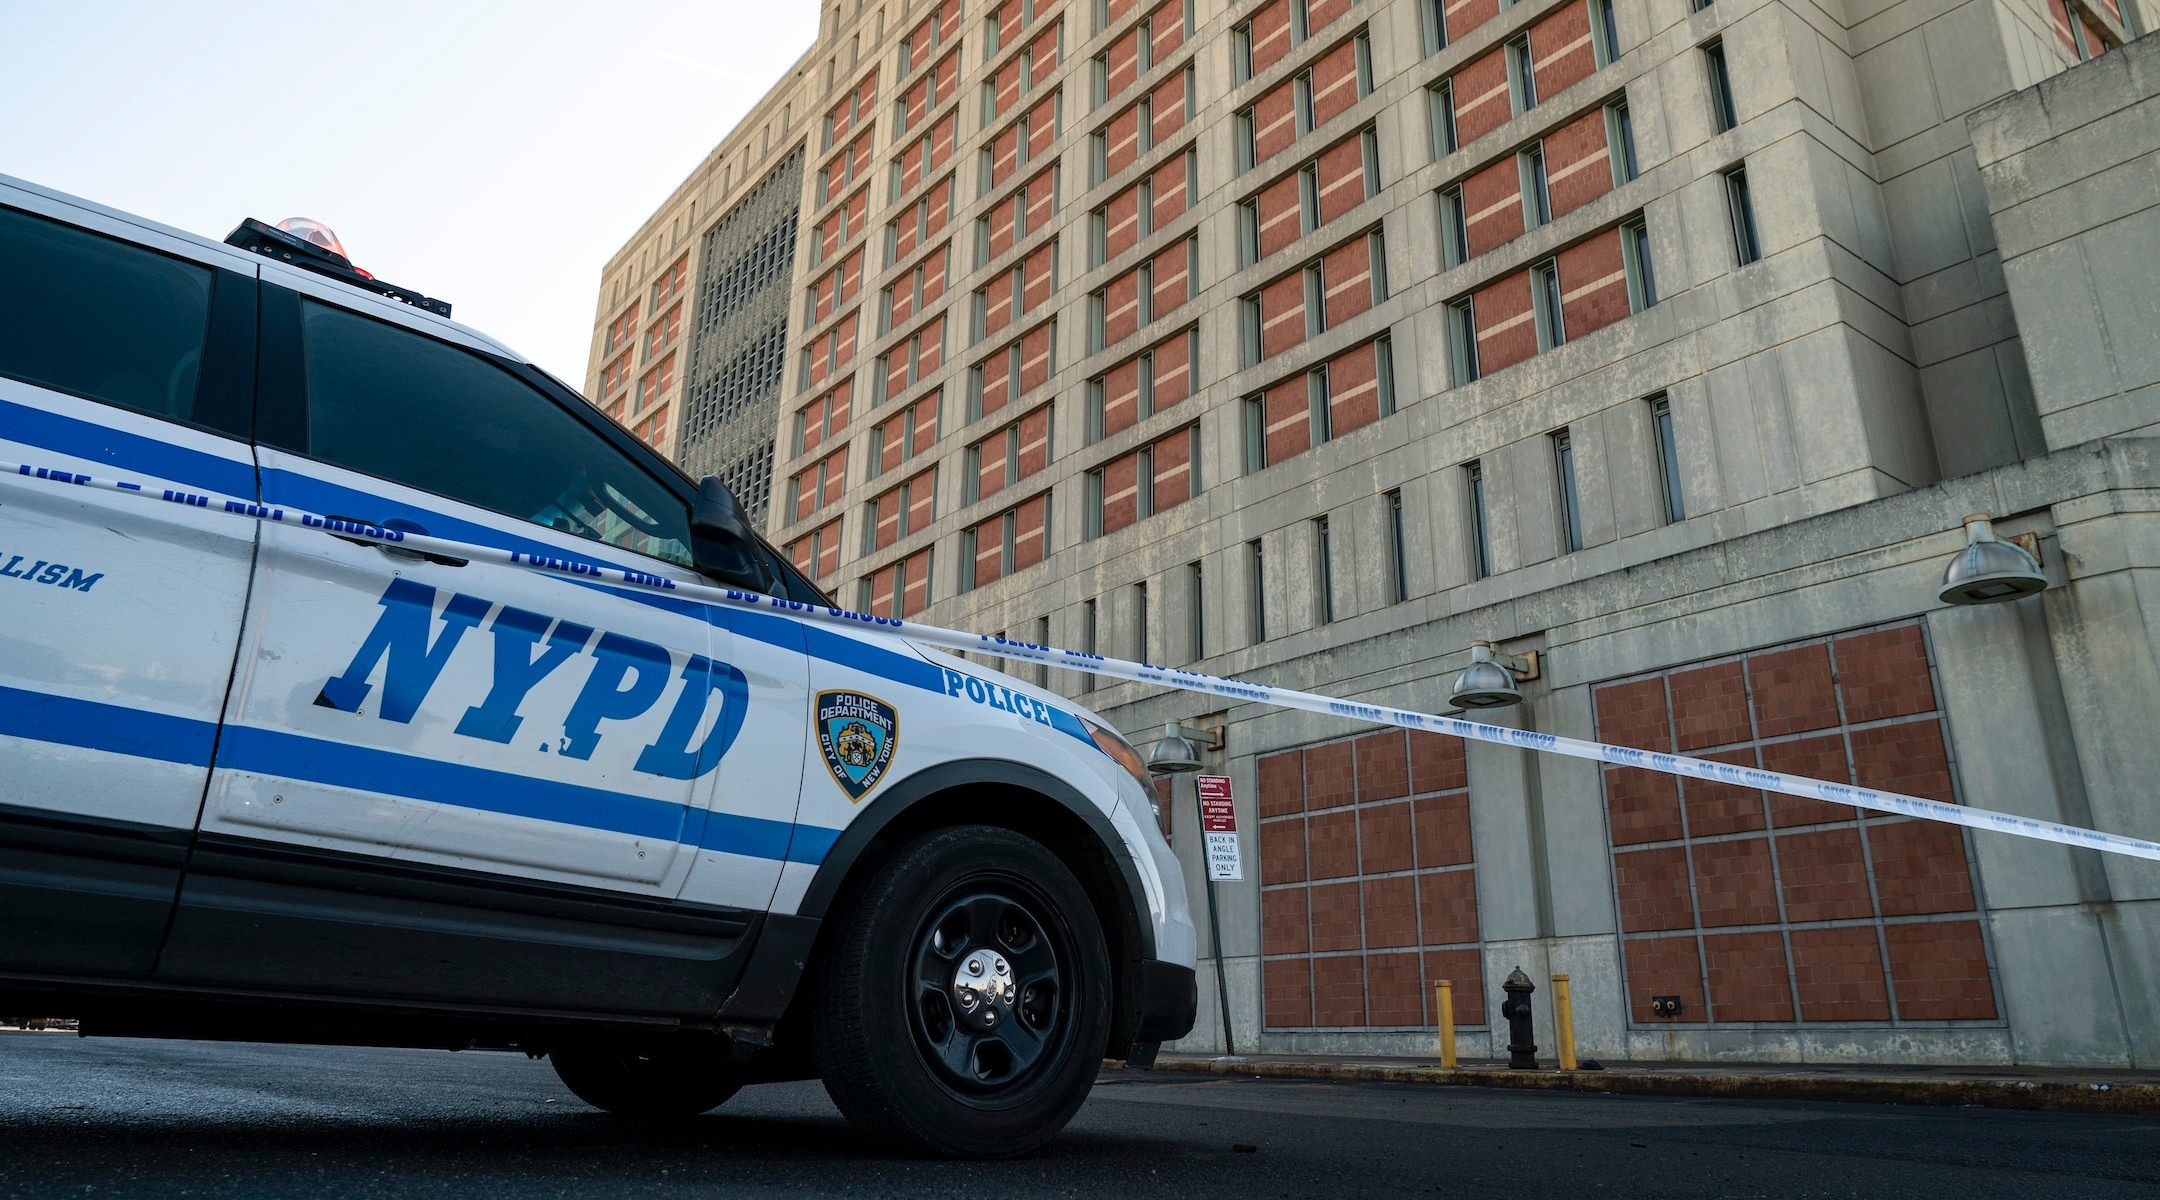 An NYPD vehicles sits outside the Metropolitan Detention Center in Brooklyn, Feb. 4, 2019. (Drew Angerer/Getty Images)